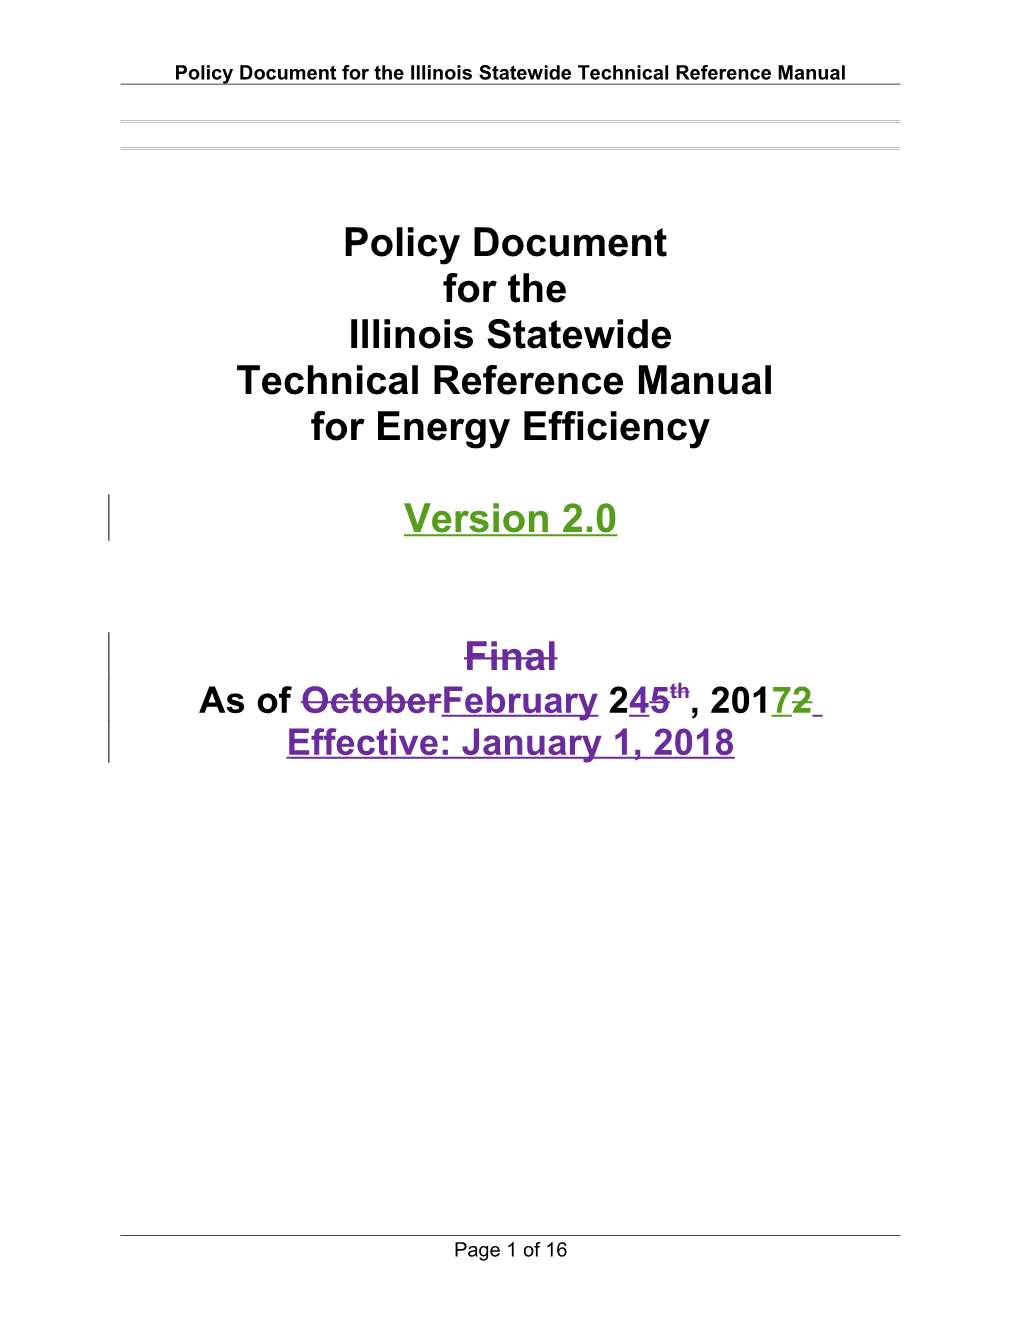 Policy Document for the Illinois Statewide Technical Reference Manual Final As of October